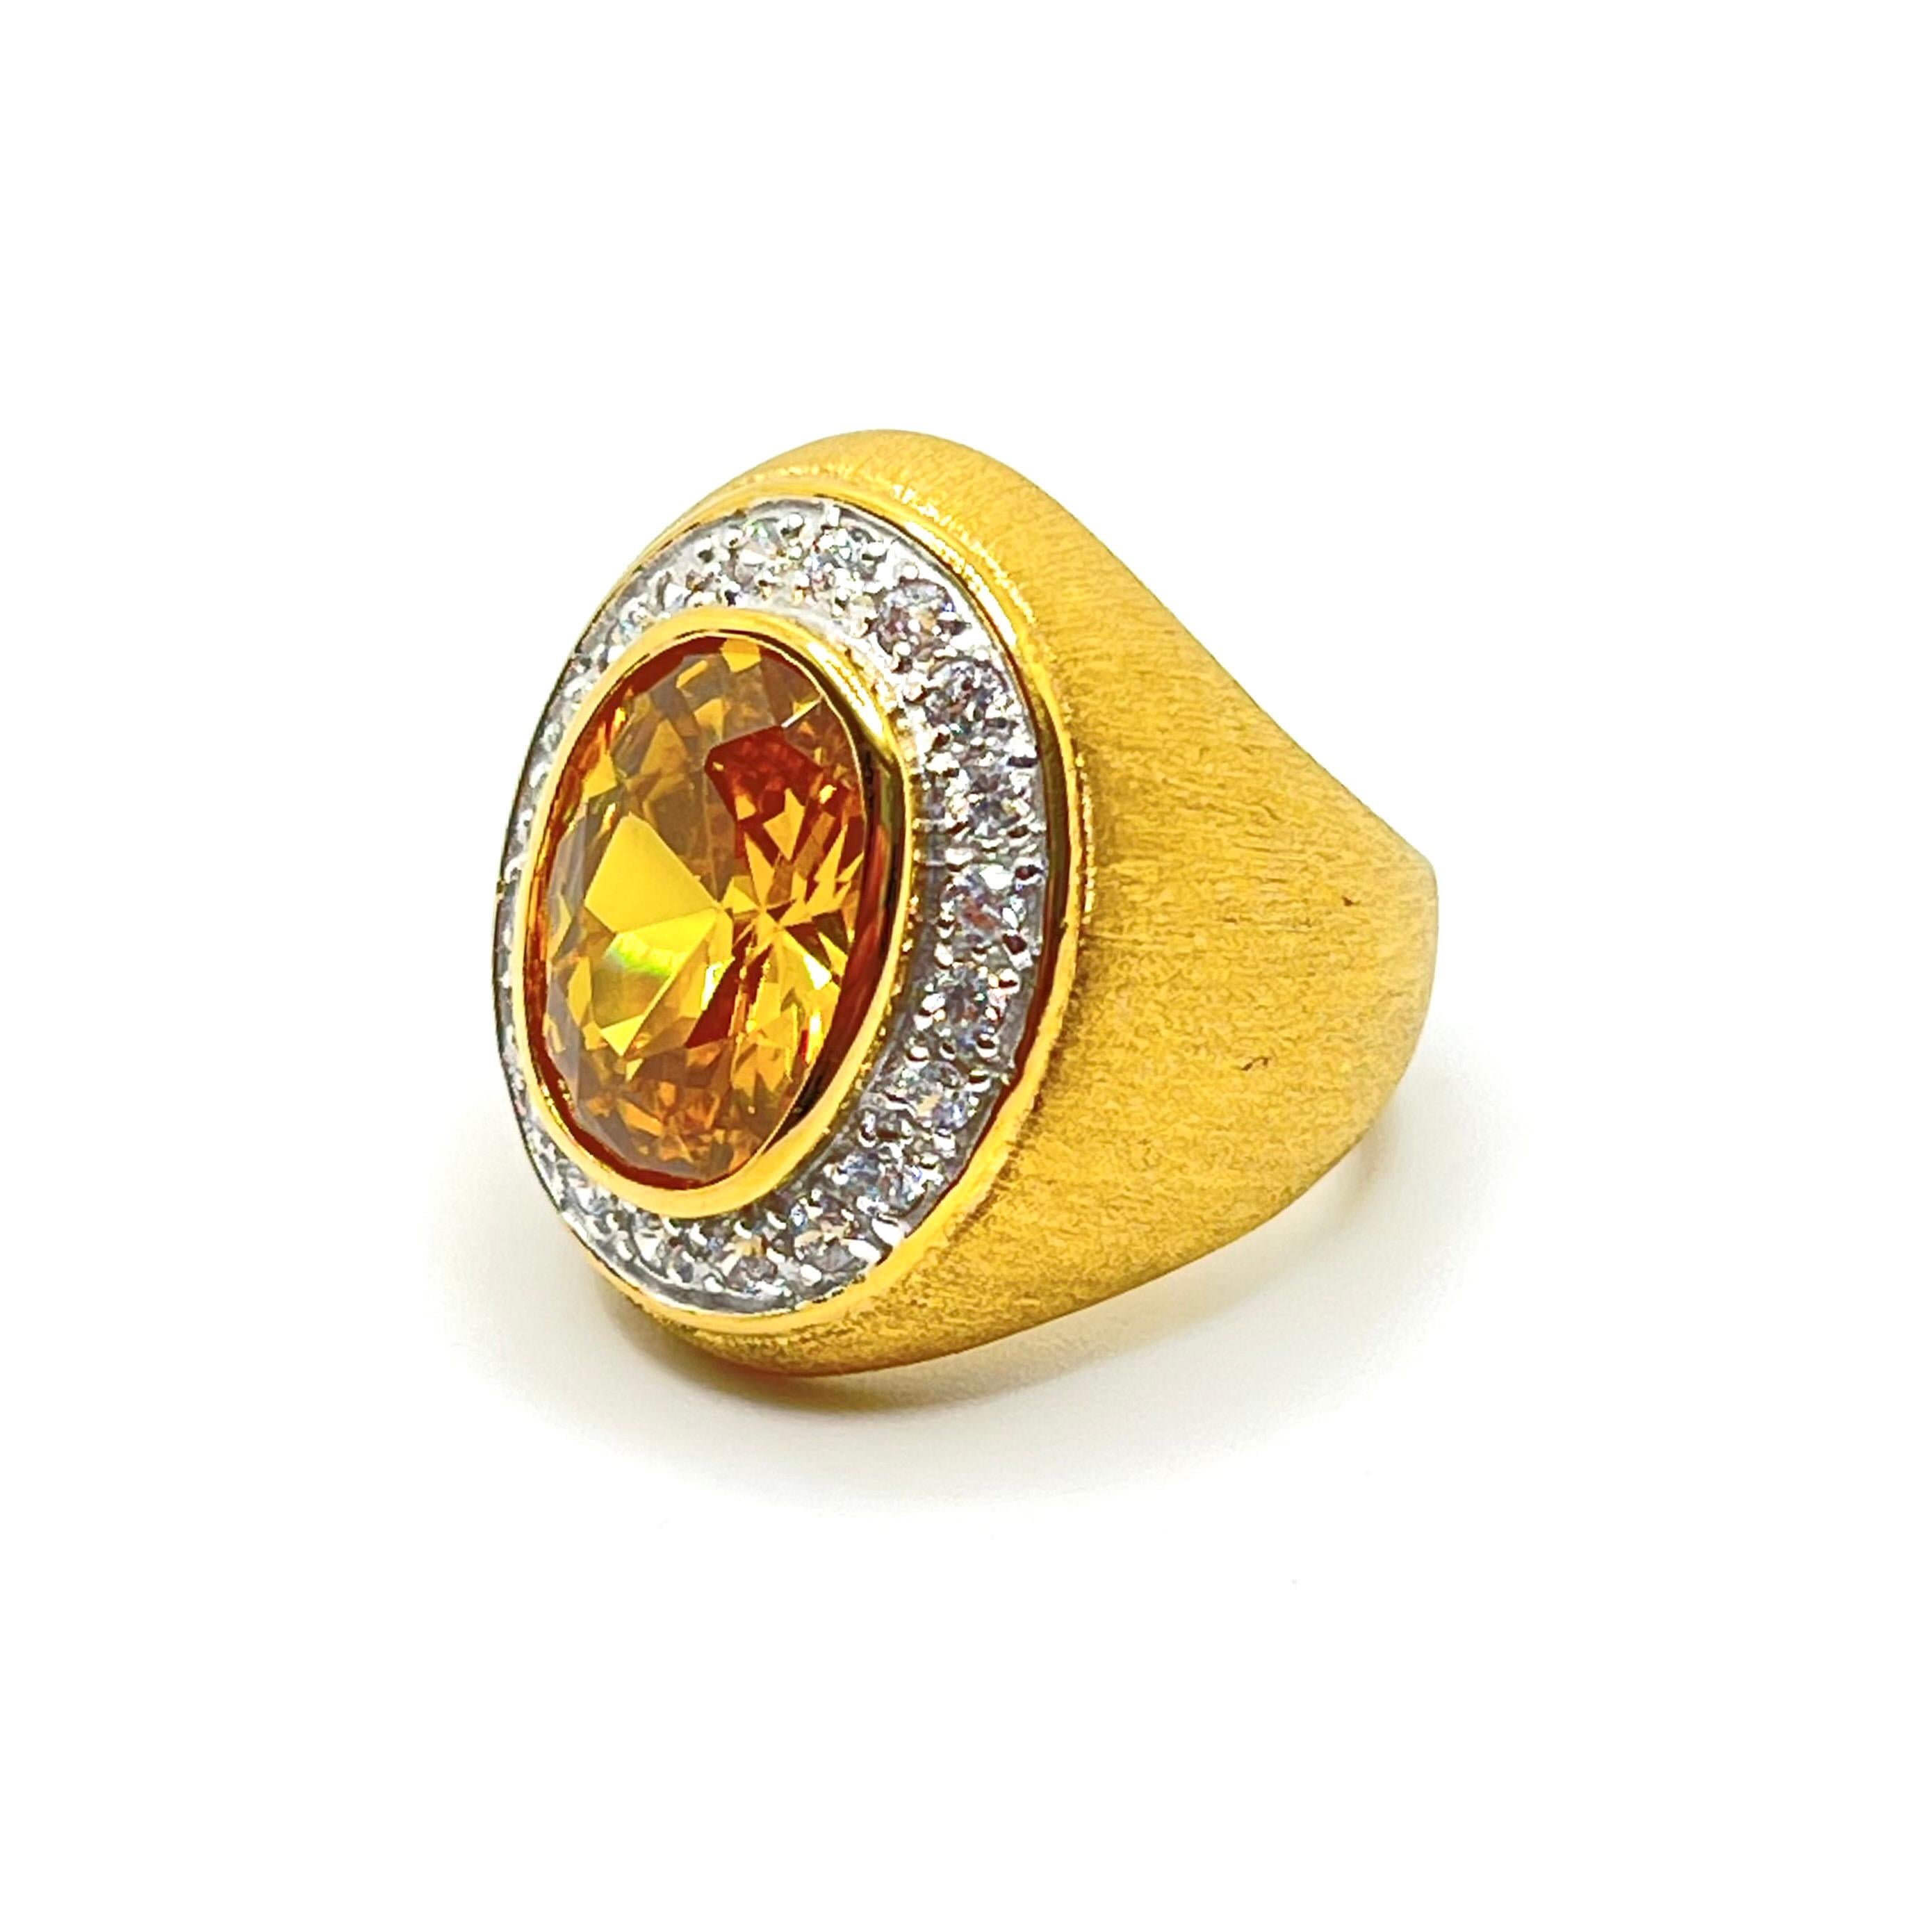 Halo Oval Simulated Yellow Topaz and Simulated Diamond Vermeil Dome Ring

This bold cocktail ring features beautiful top quality 6.5ct oval simulated topaz with halo round simulated diamond cubic zirconia, handset in two-tone 18k yellow gold vermeil